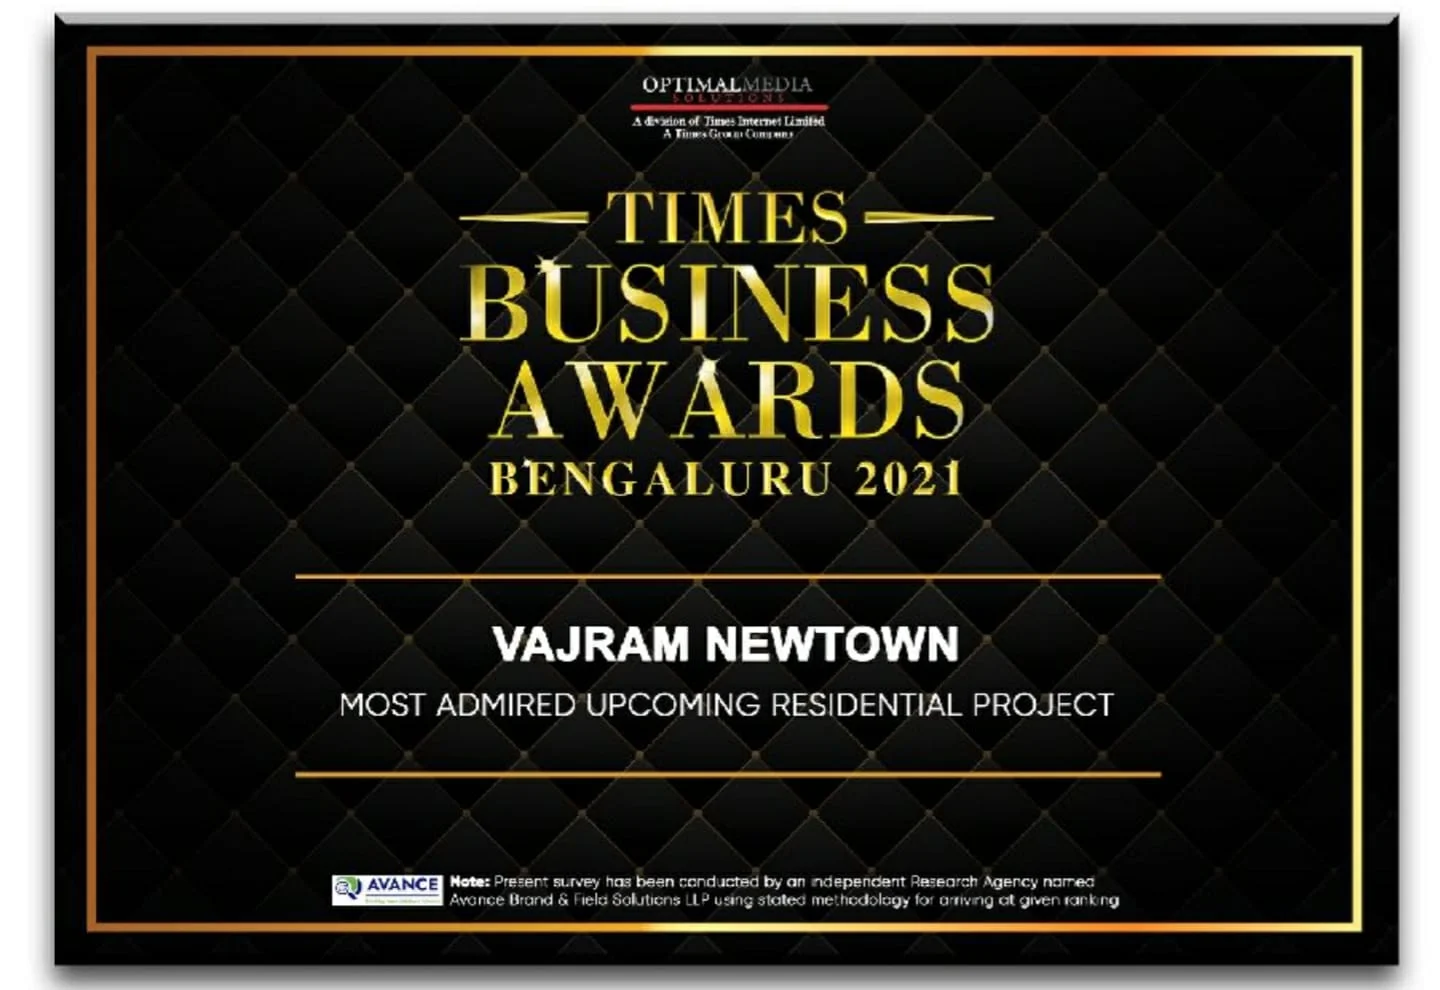 Most udmired residential project Vajram Newtown Times Business Award 2021